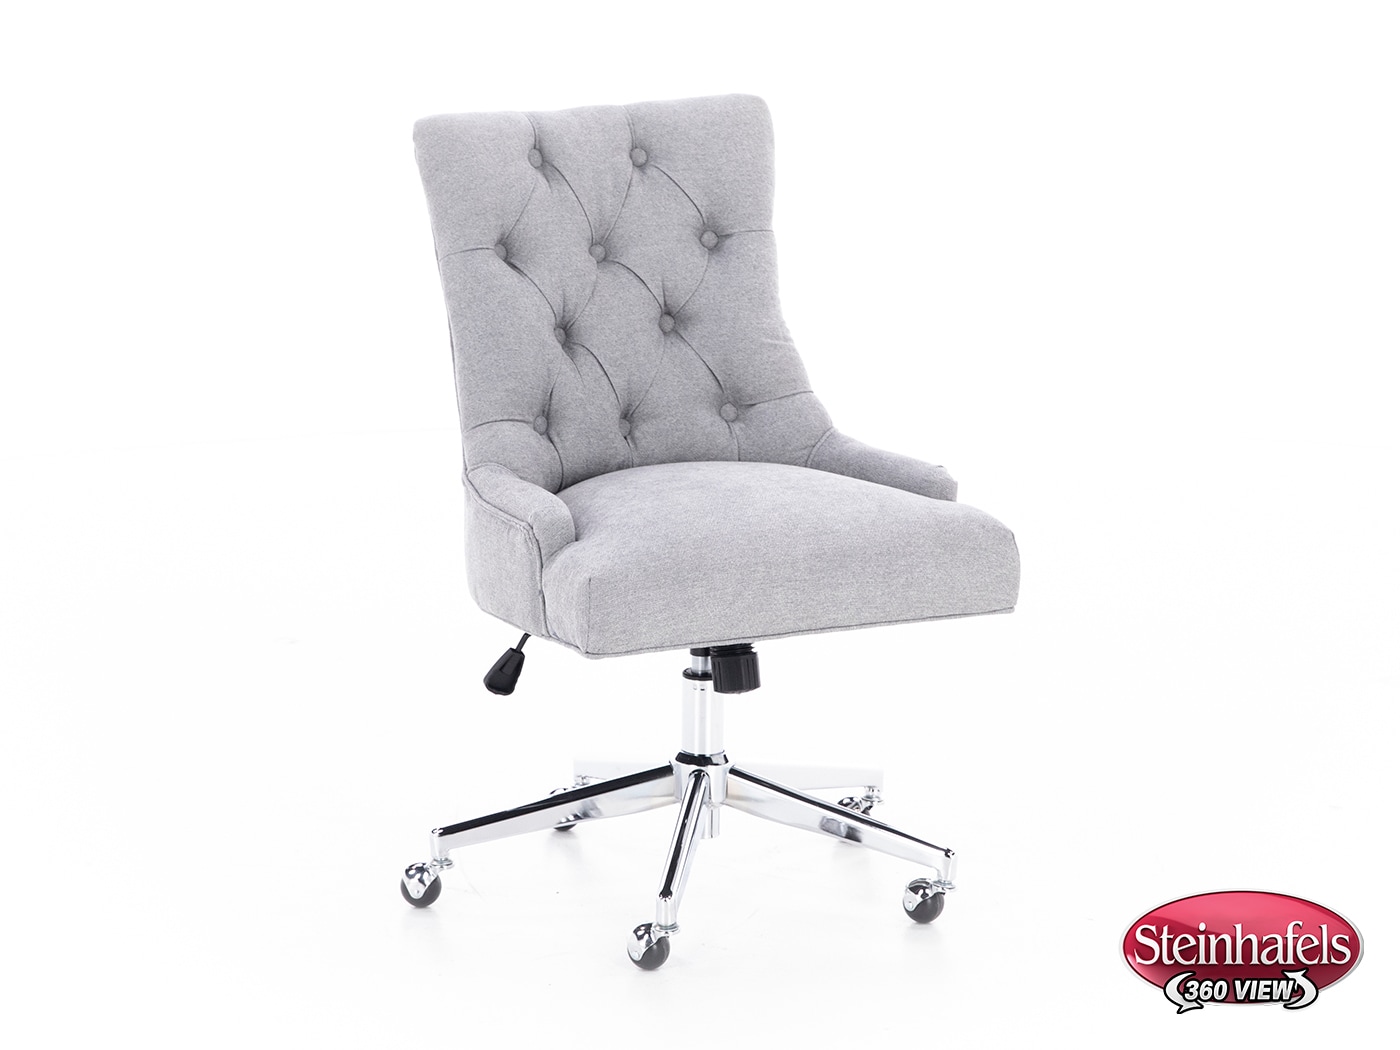 ofst grey desk chair  image cha  